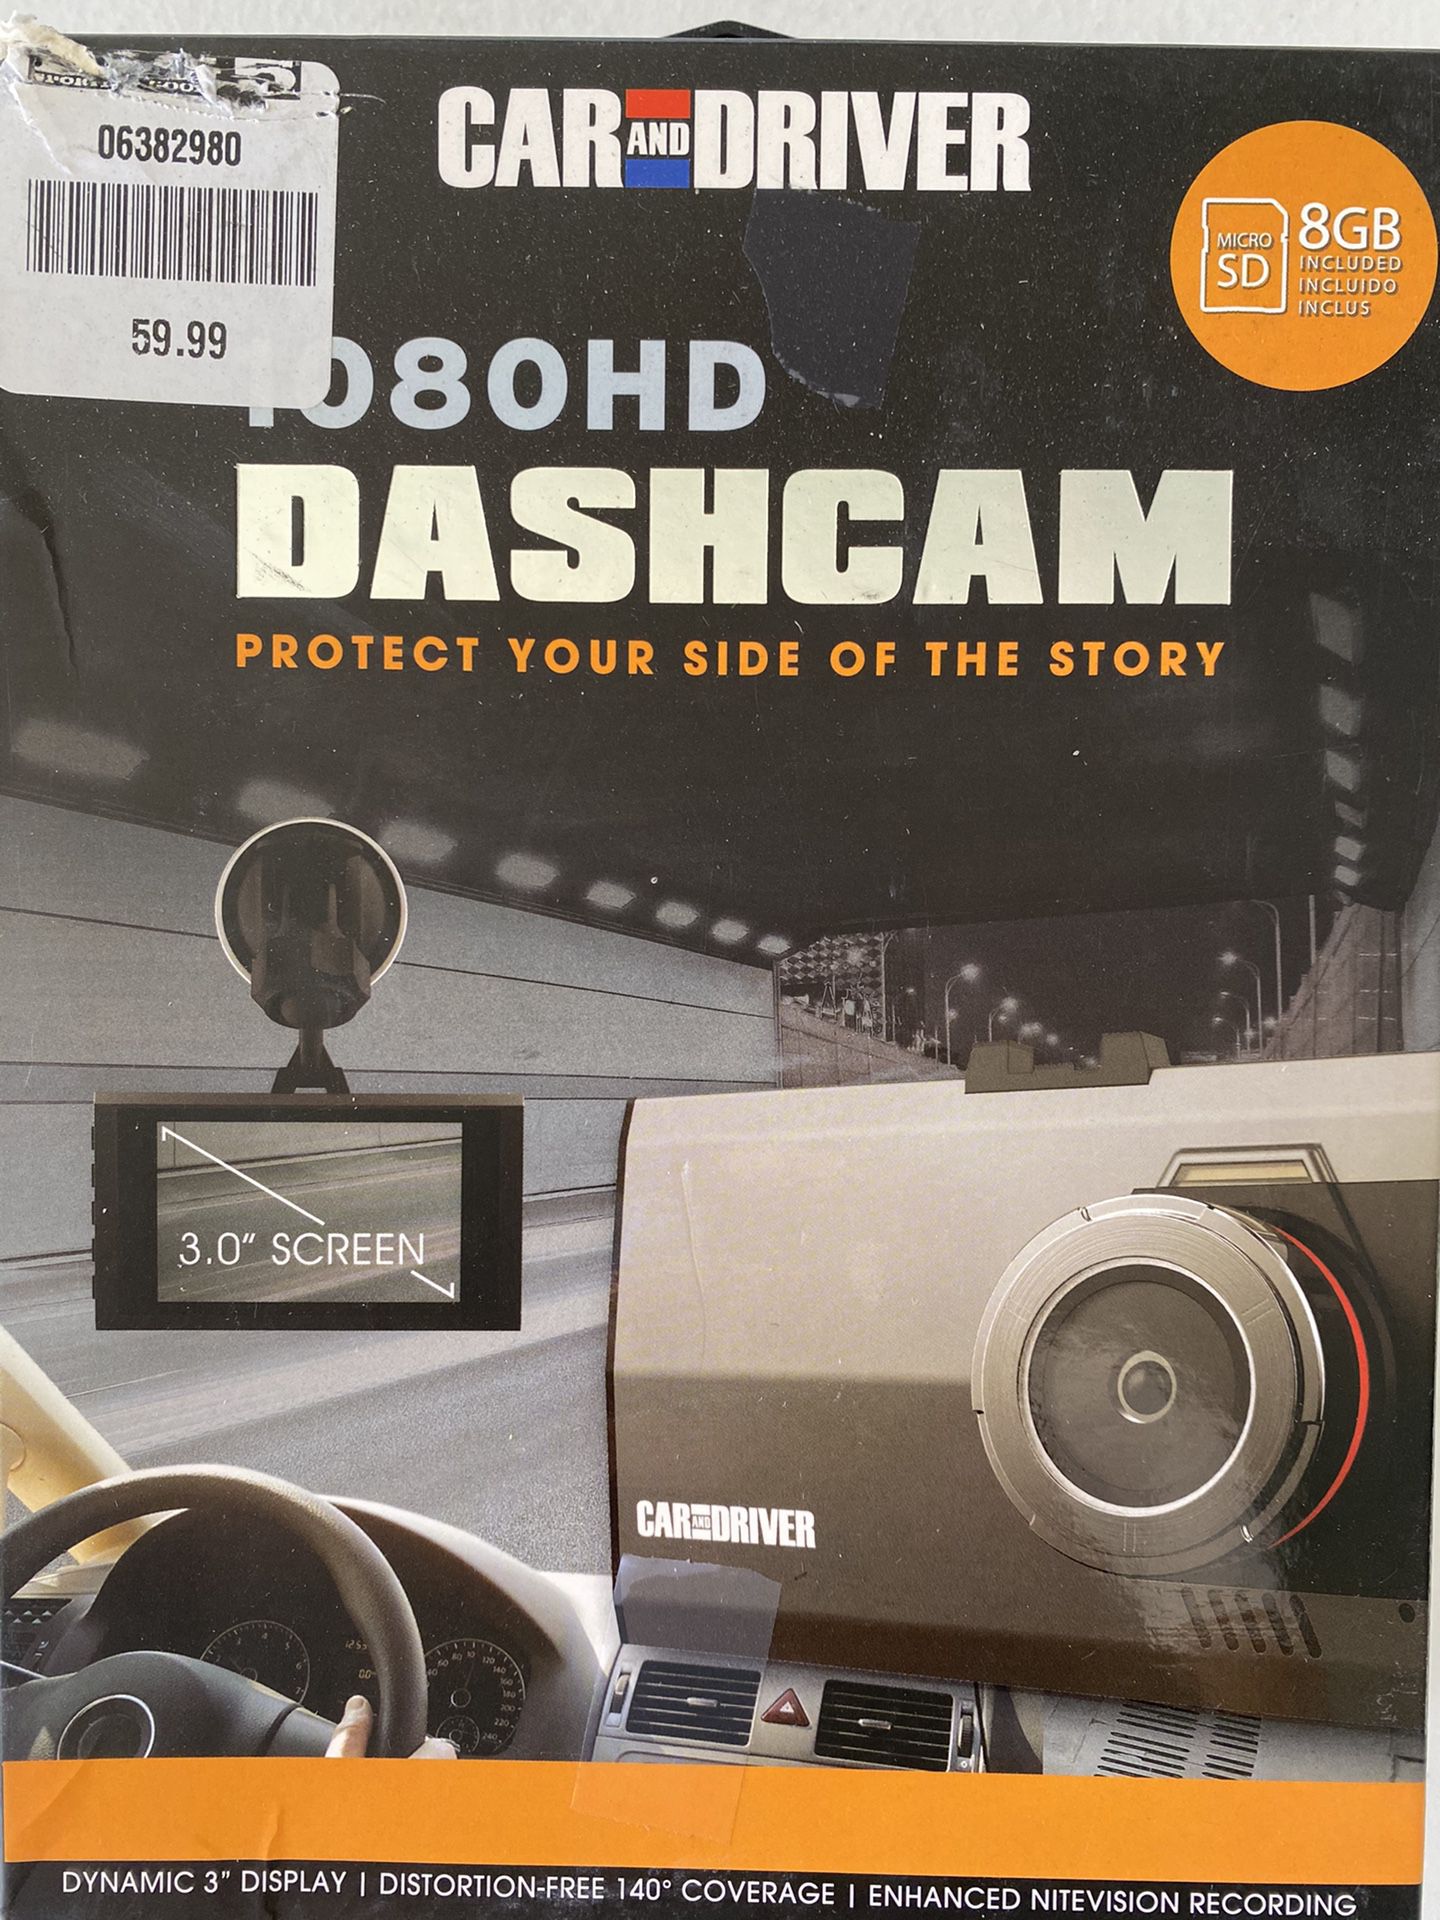 New dash cam old model / buy one get one free